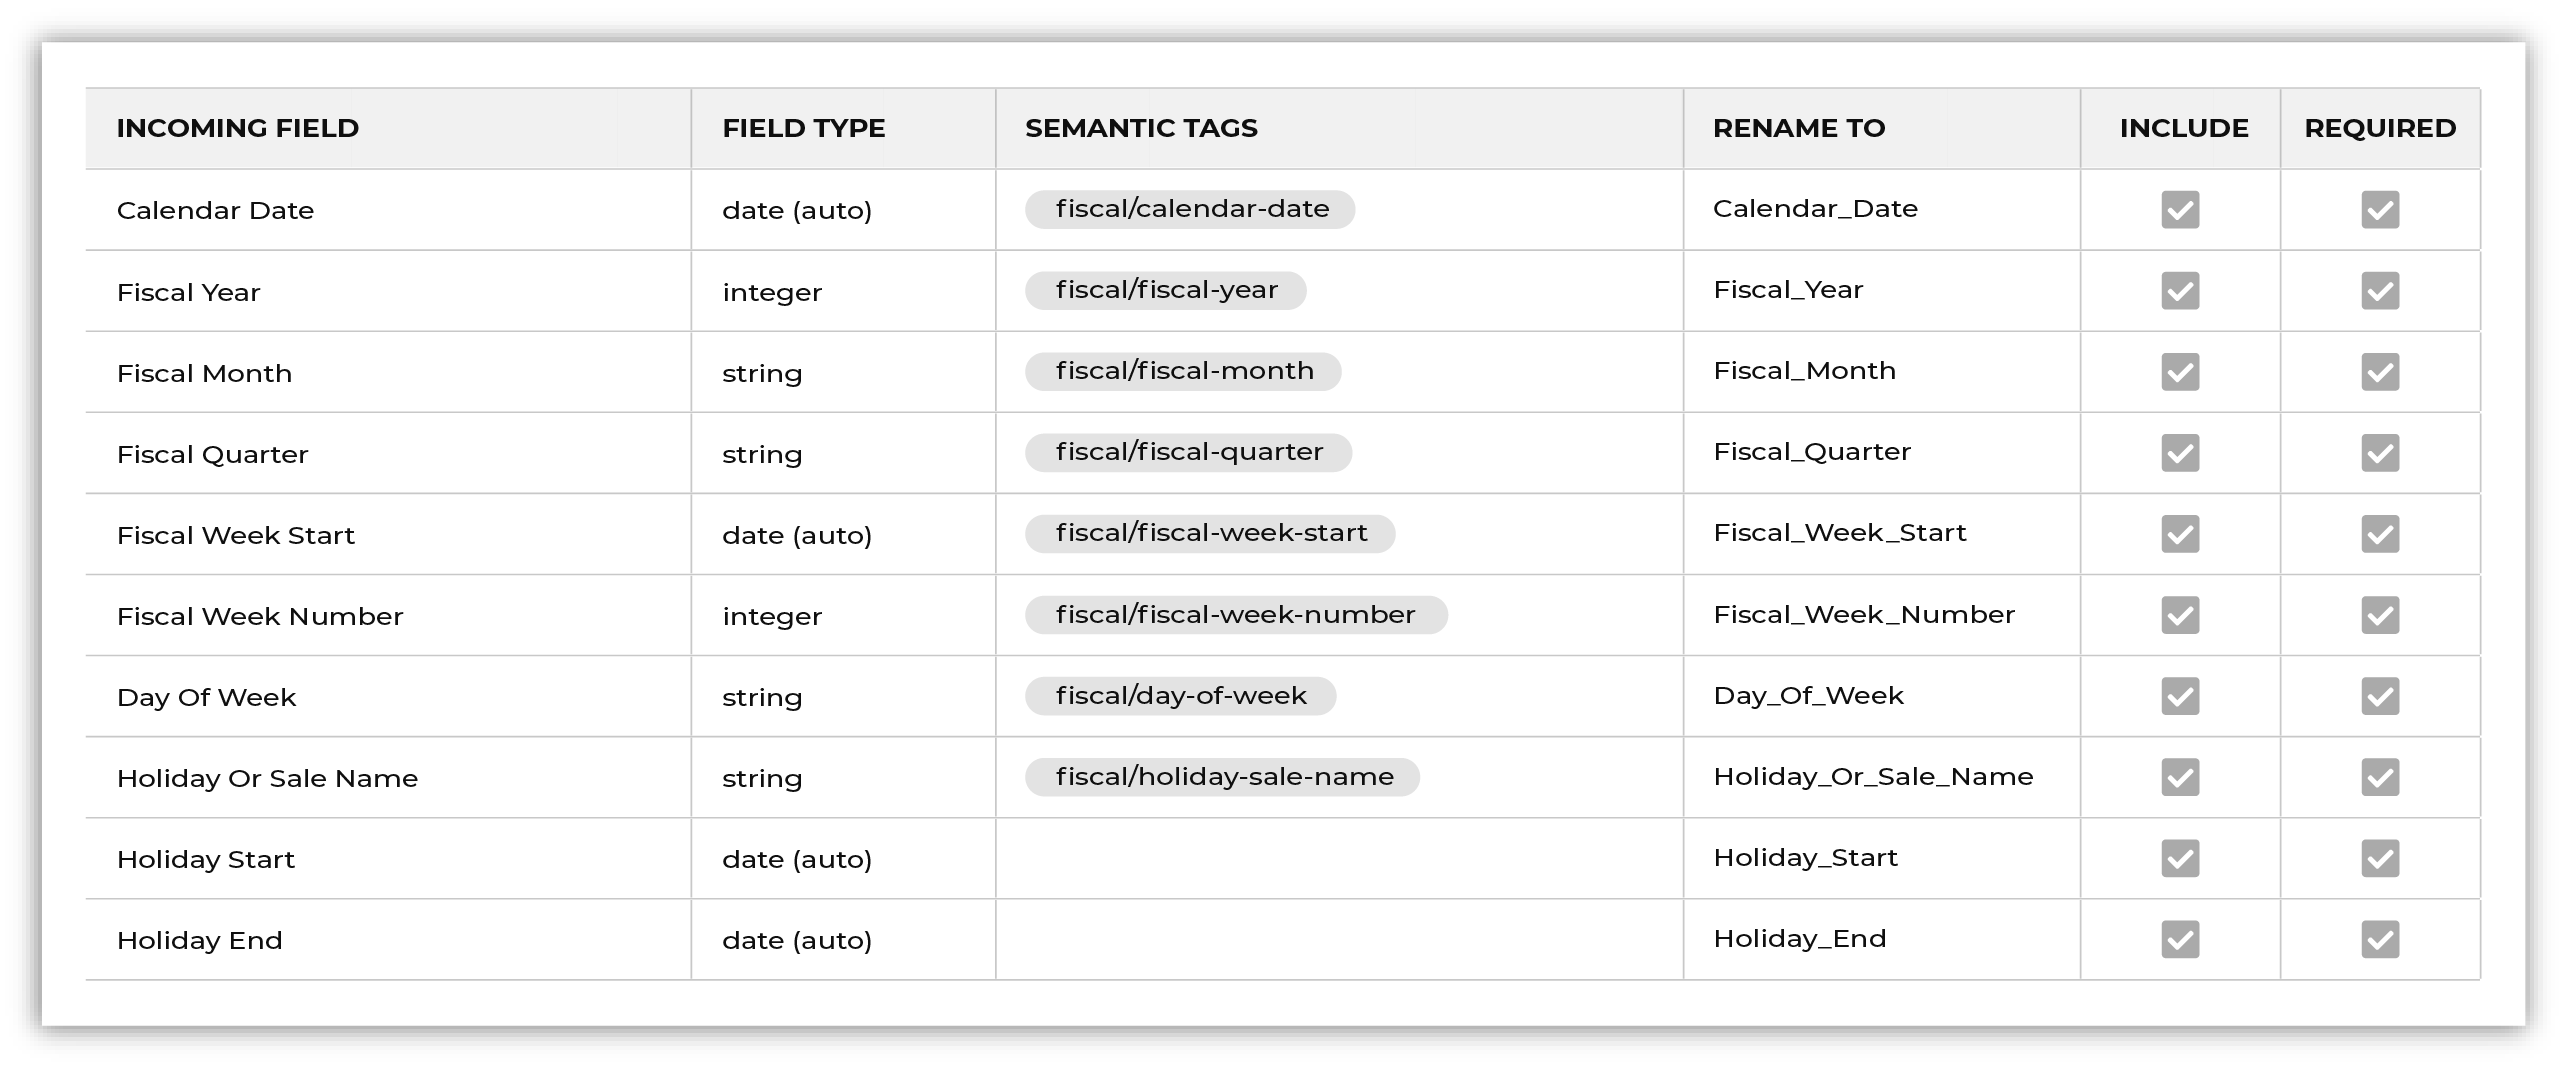 The NRF calendar data asset with semantic tags applied and fields renamed.